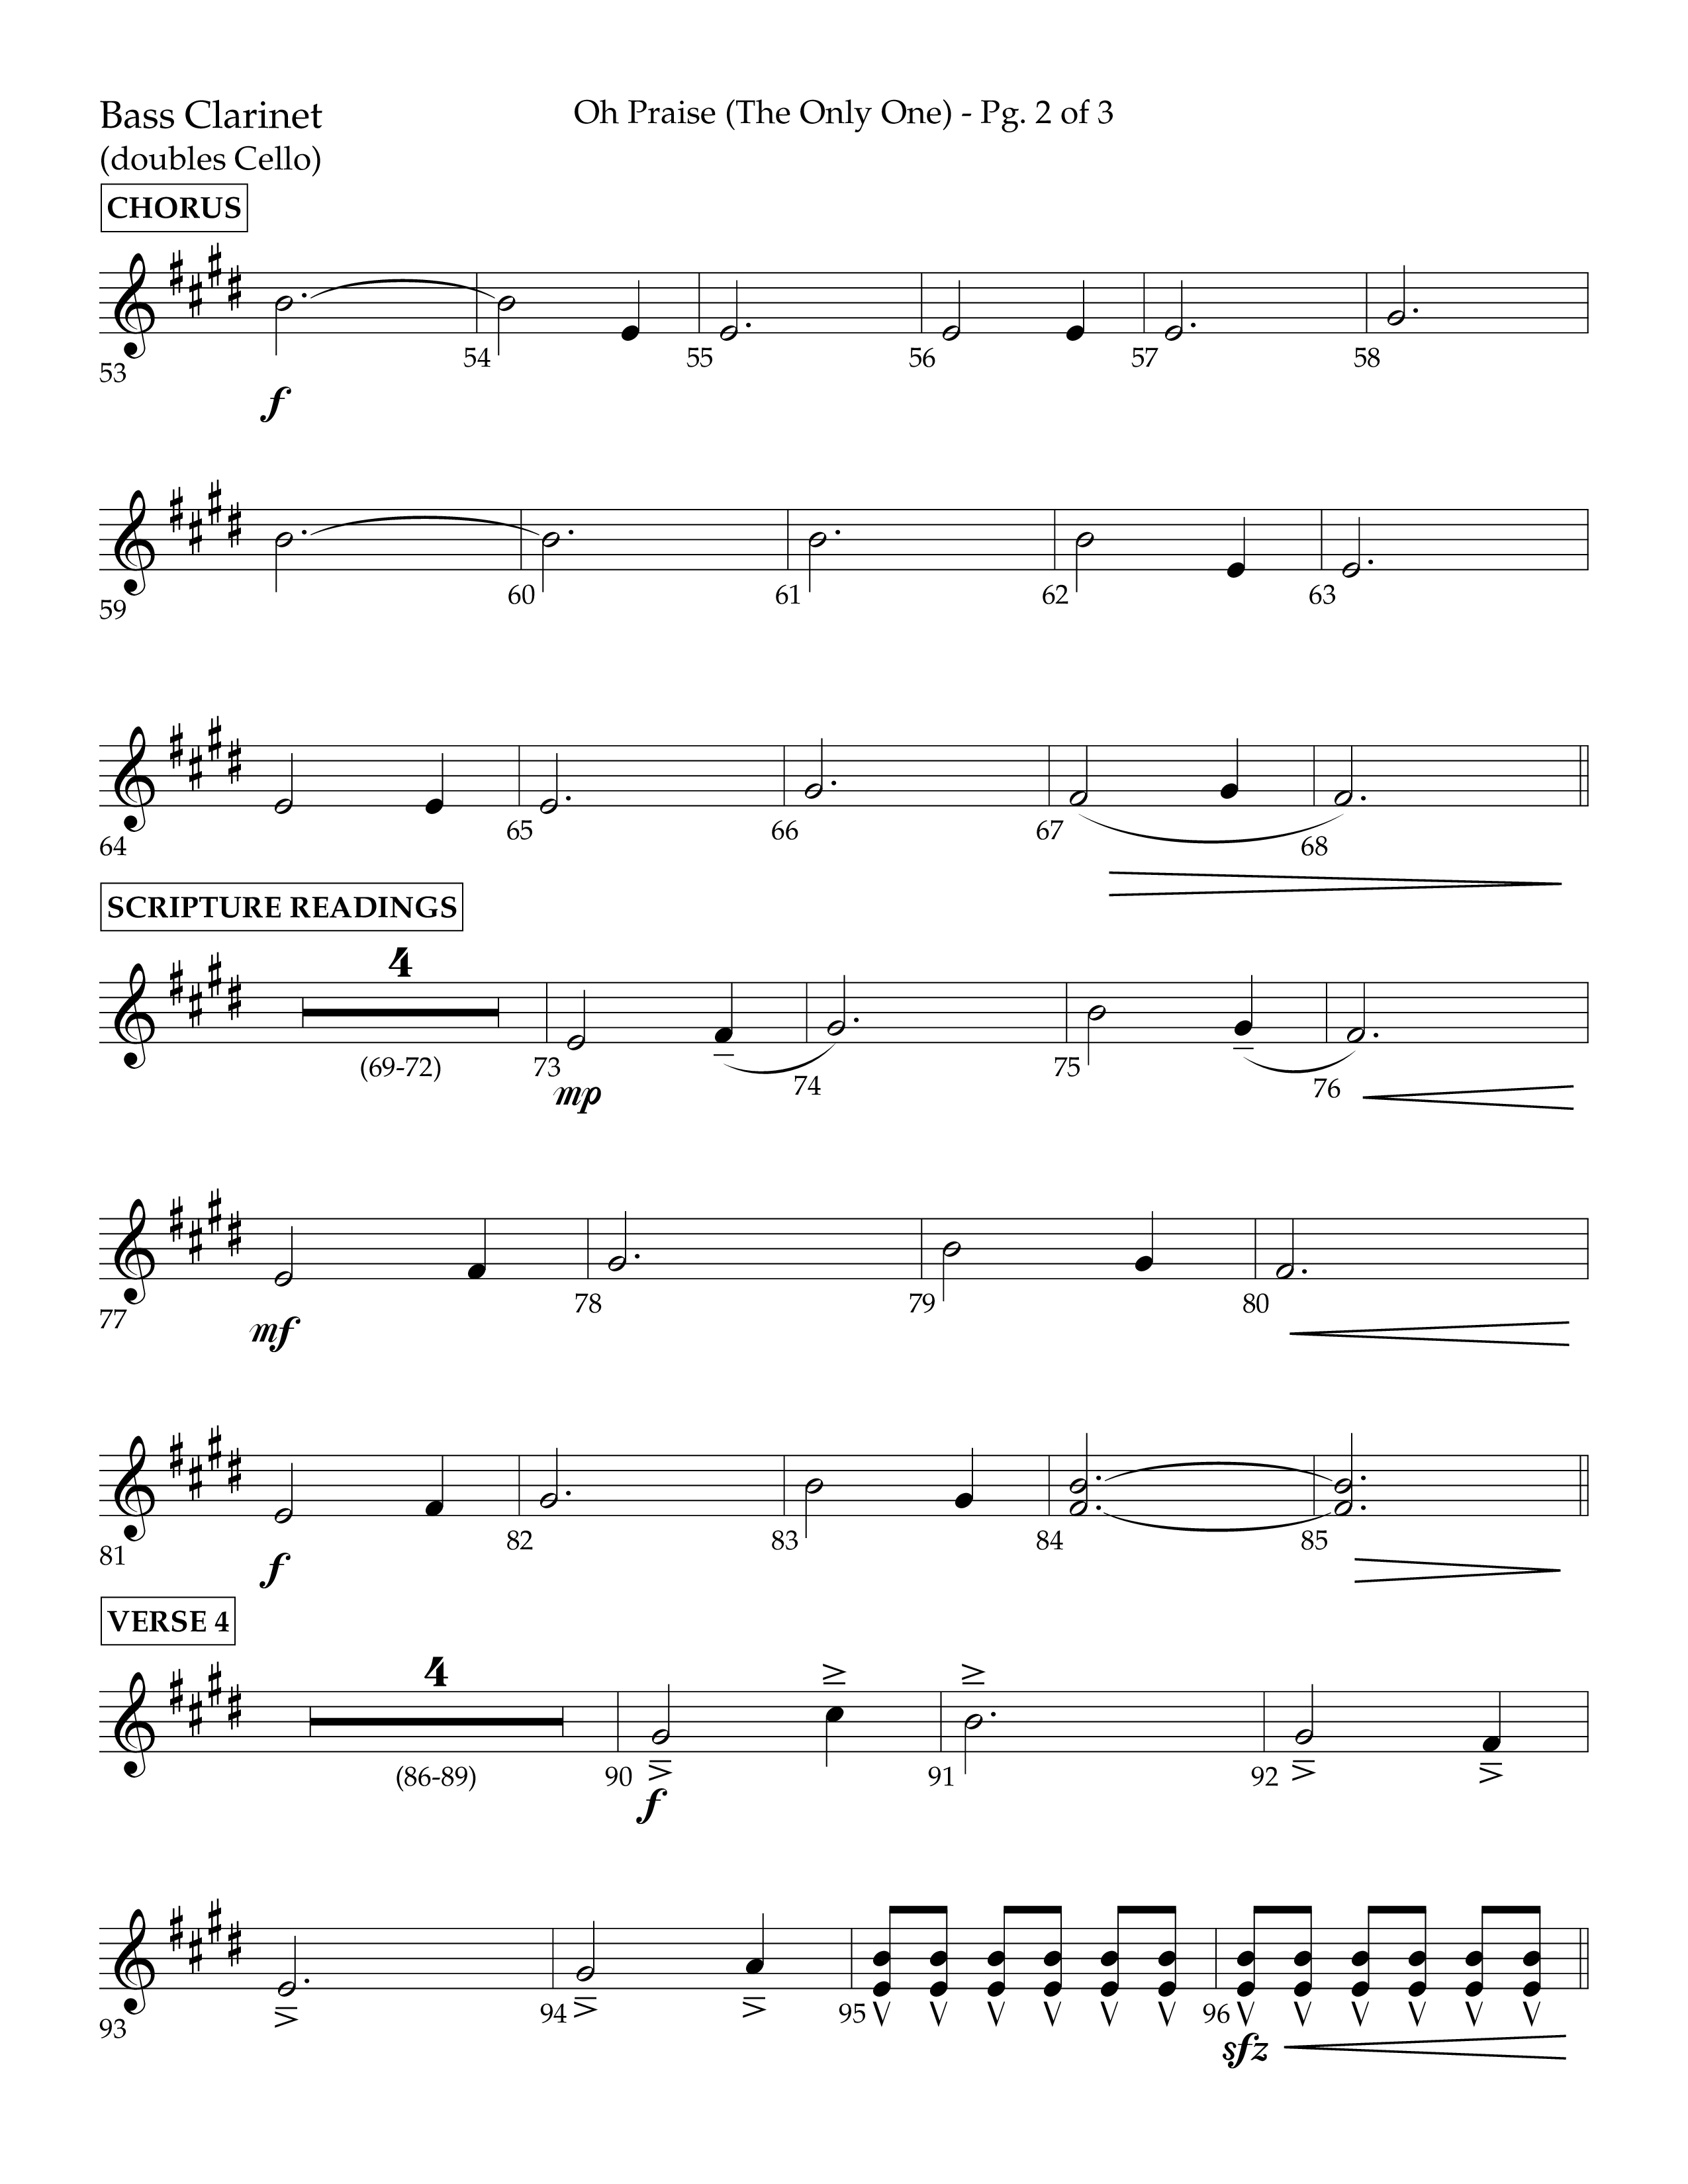 Oh Praise (The Only One) with Doxology (Choral Anthem SATB) Bass Clarinet (Lifeway Choral / Arr. John Bolin / Orch. Cliff Duren)